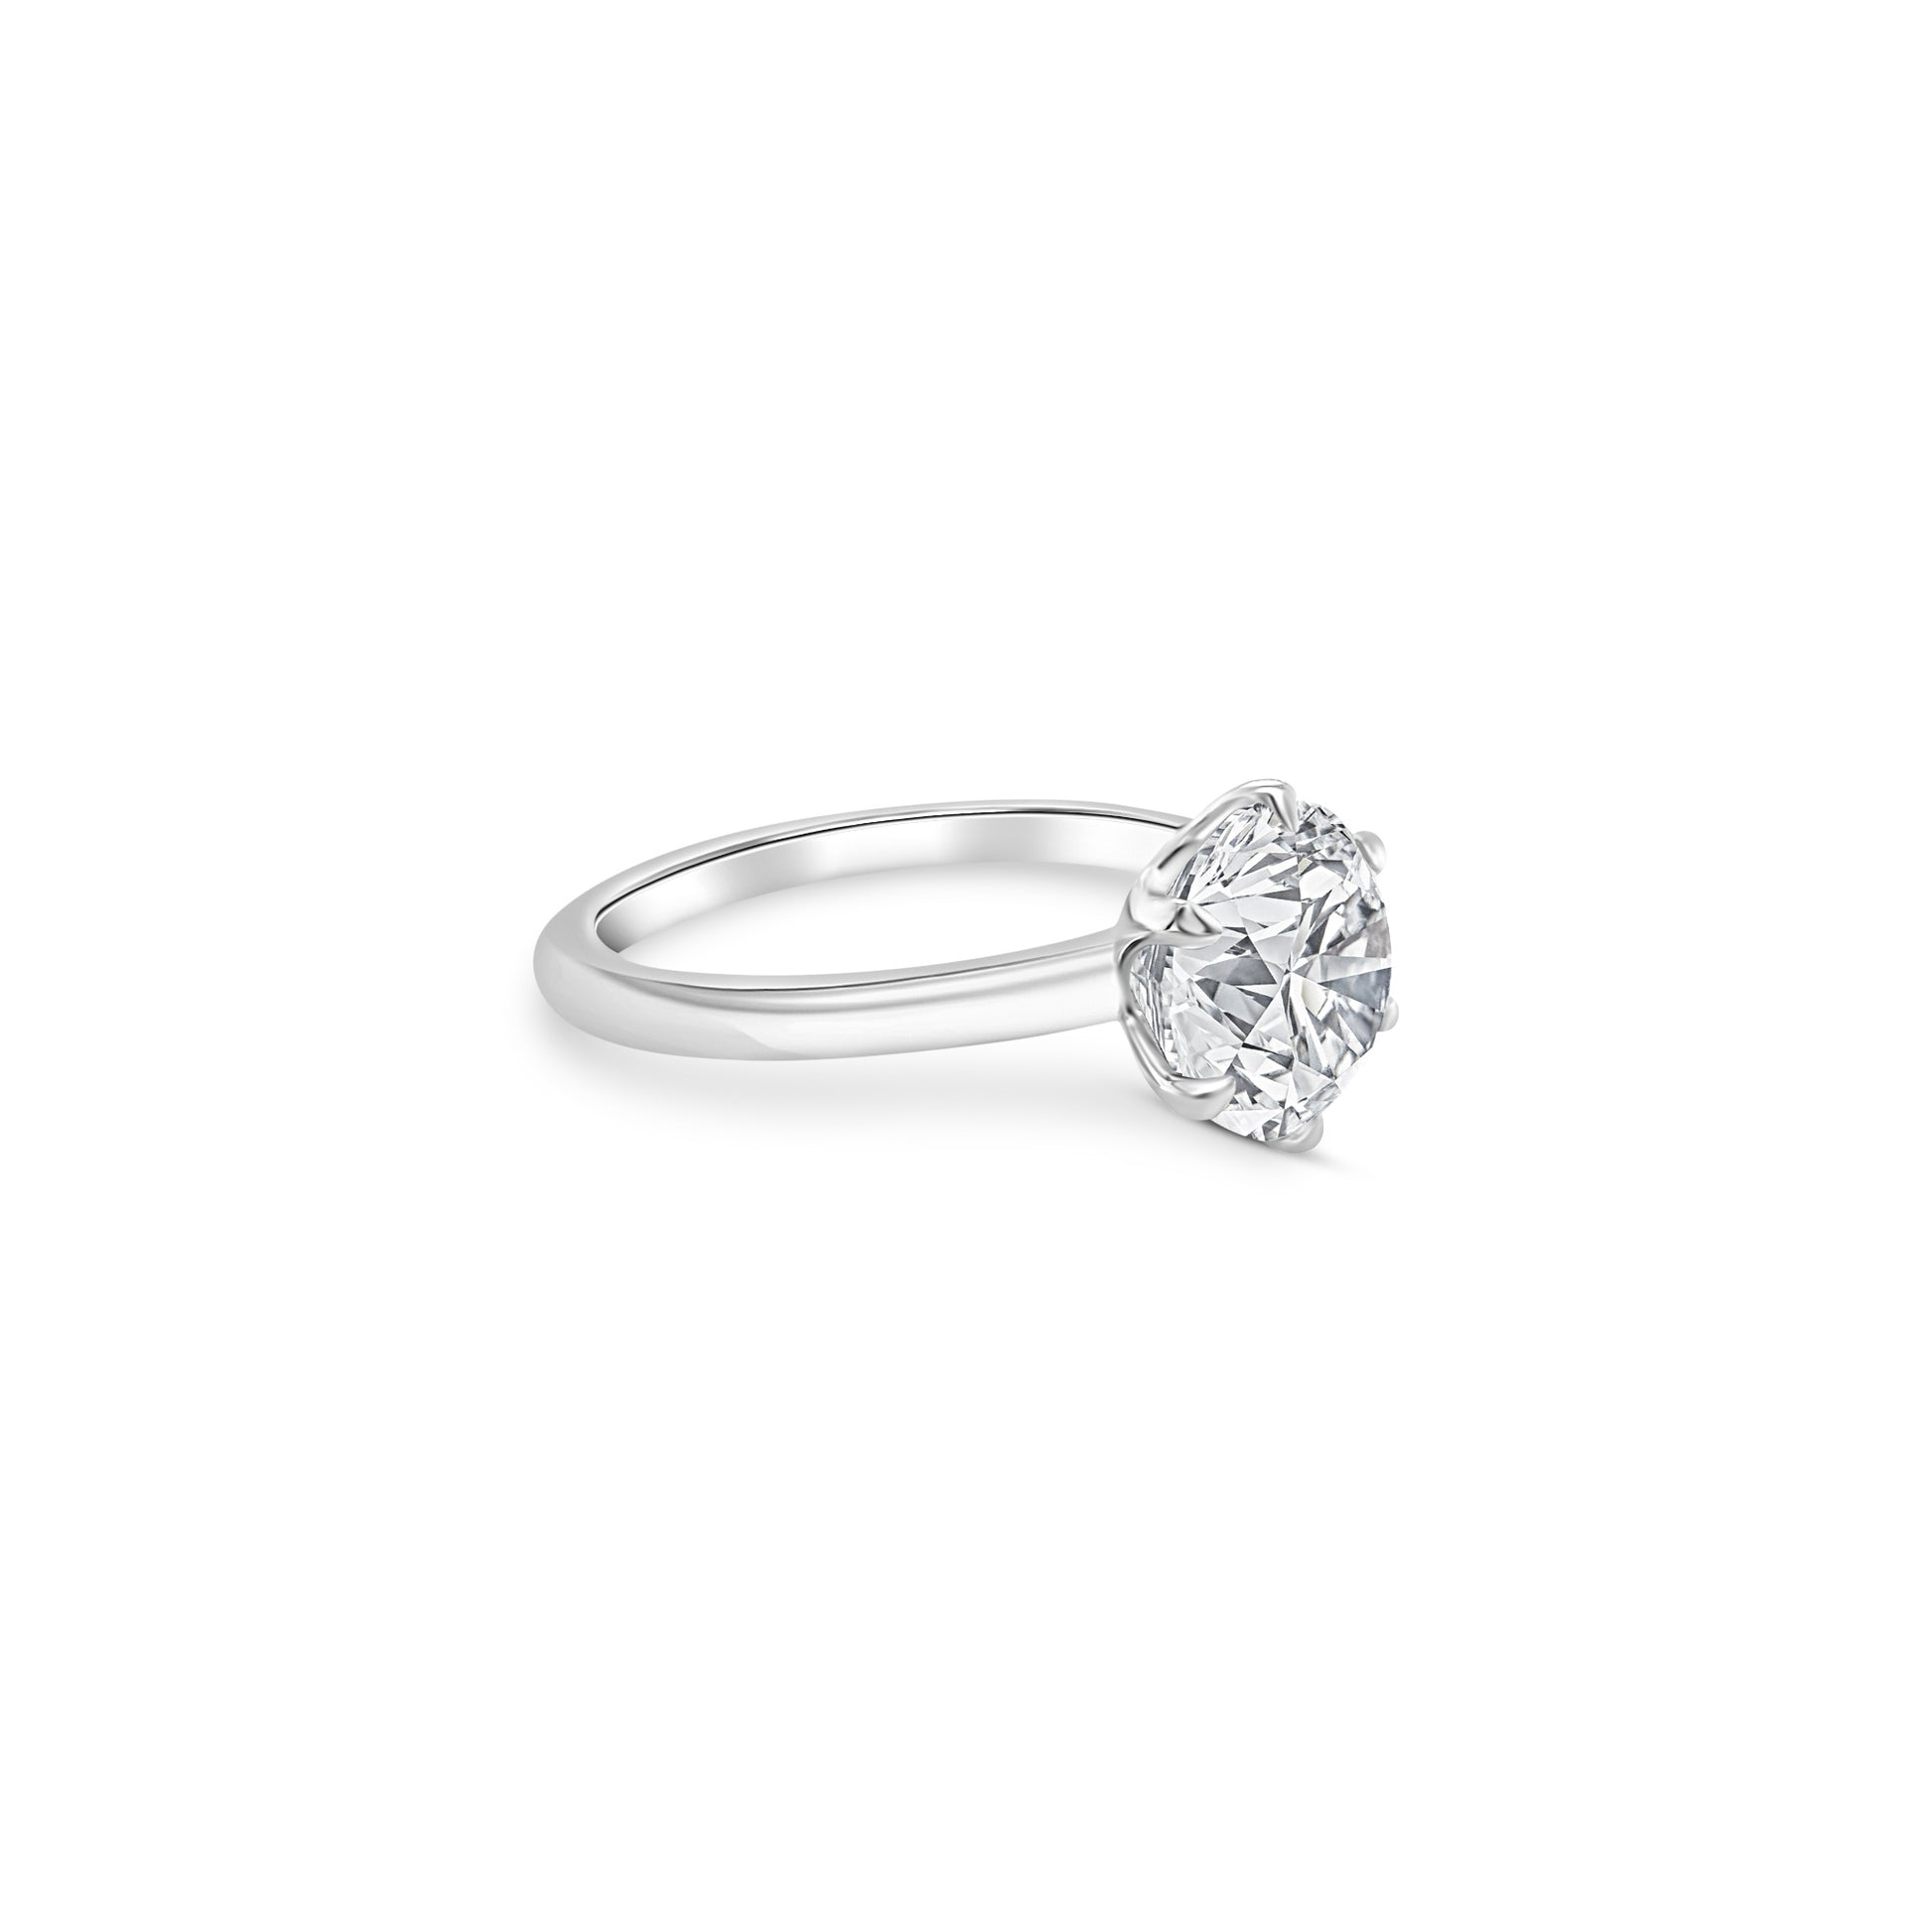 A, round, brilliant, solitaire, diamond, ring, with, a, sparkling, center, stone, set, in, a, prong, setting, on, a, polished, metal, band.